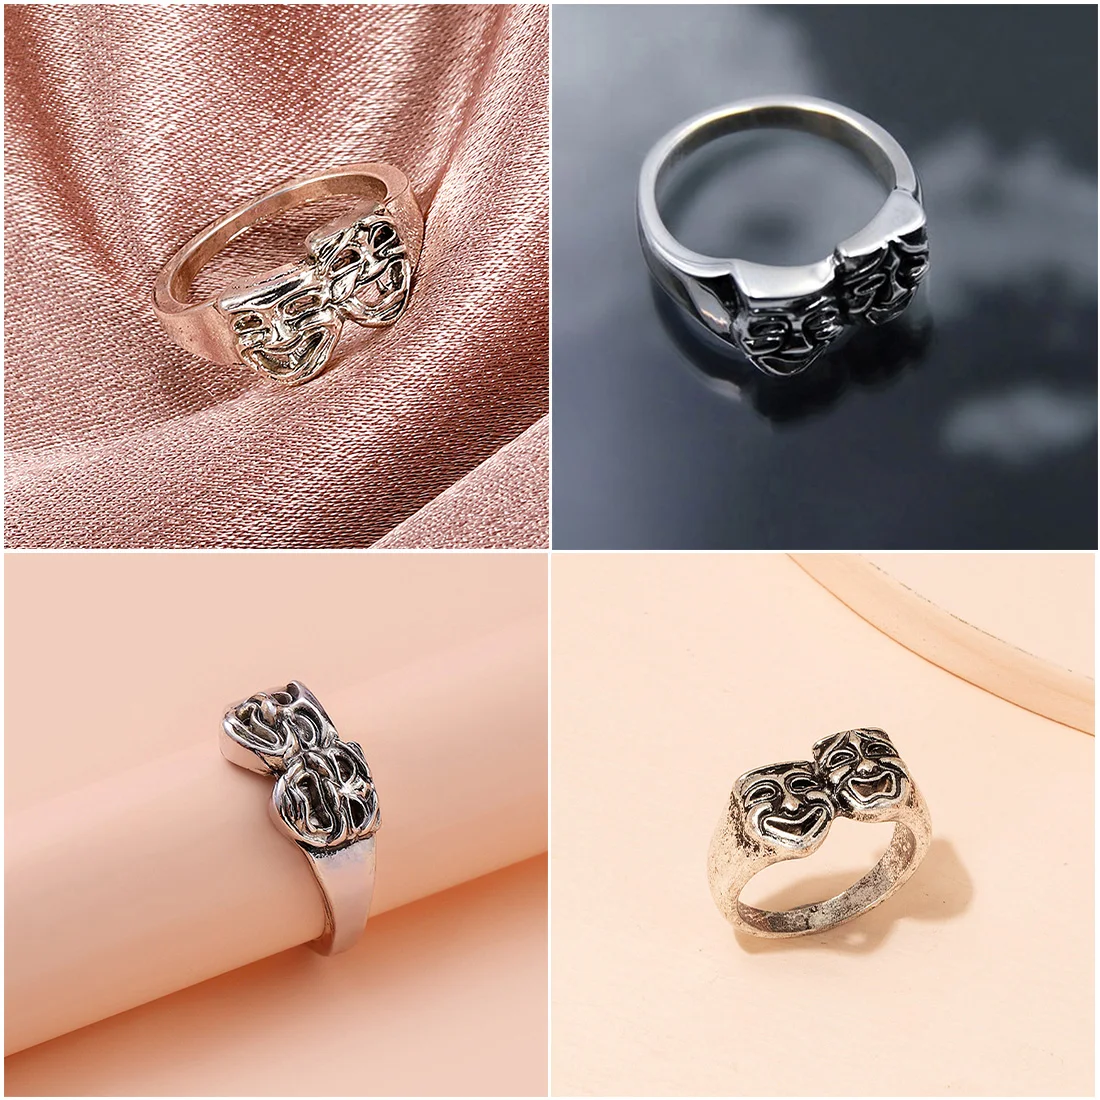 

New Style Unique Design Asymmetrical 6/7/8 Alloy Rings Smile Crying Mask Rings for Men Women Personality Gothic Hip Hop Jewelry